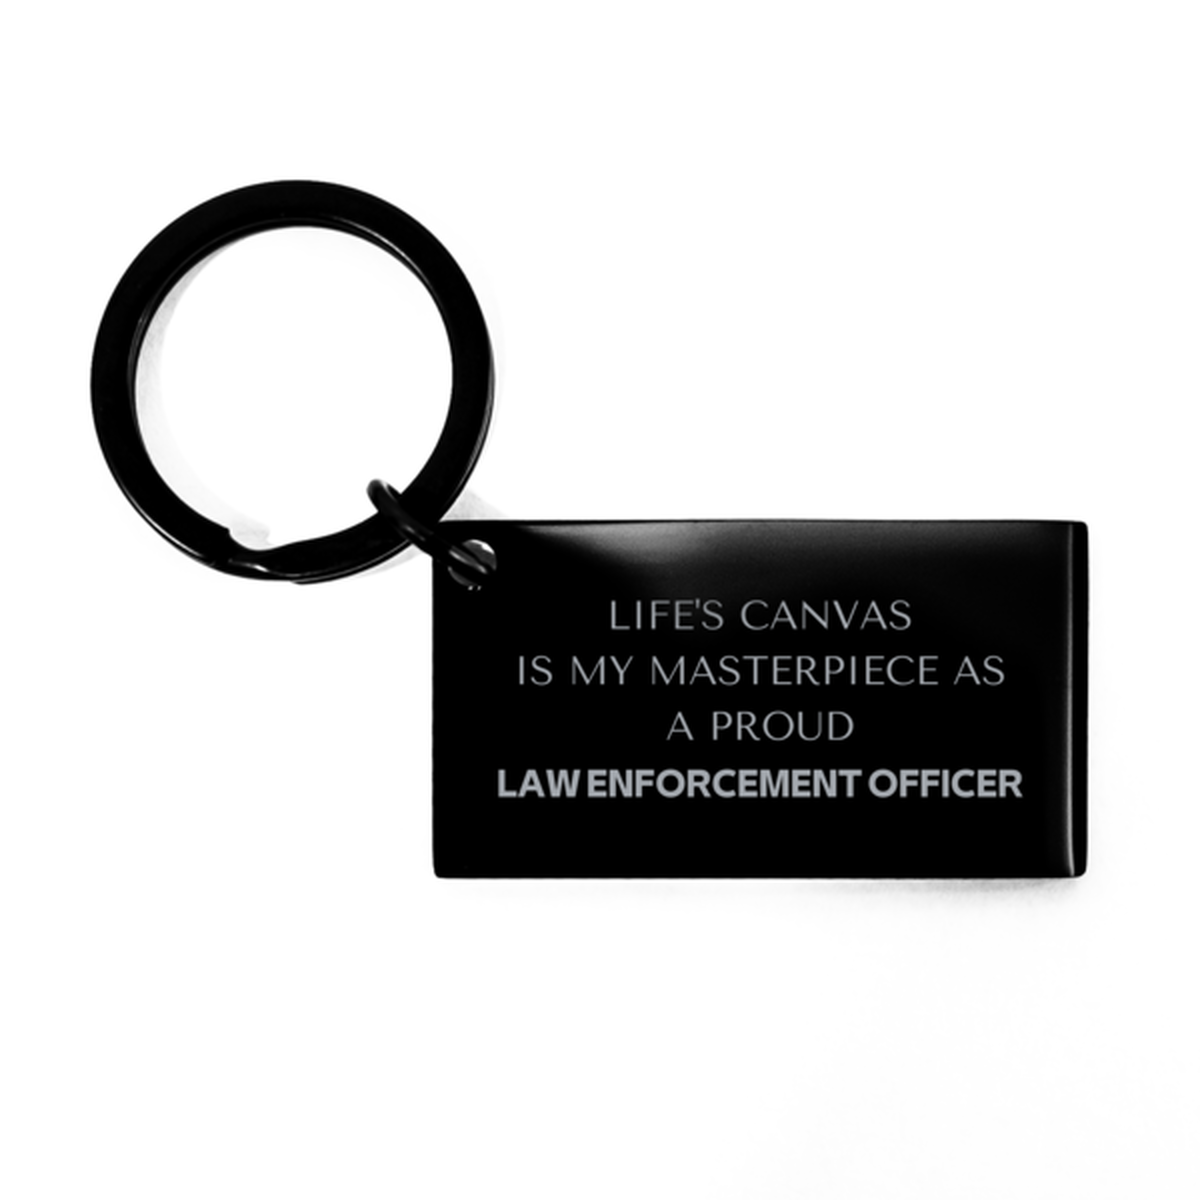 Proud Law Enforcement Officer Gifts, Life's canvas is my masterpiece, Epic Birthday Christmas Unique Keychain For Law Enforcement Officer, Coworkers, Men, Women, Friends